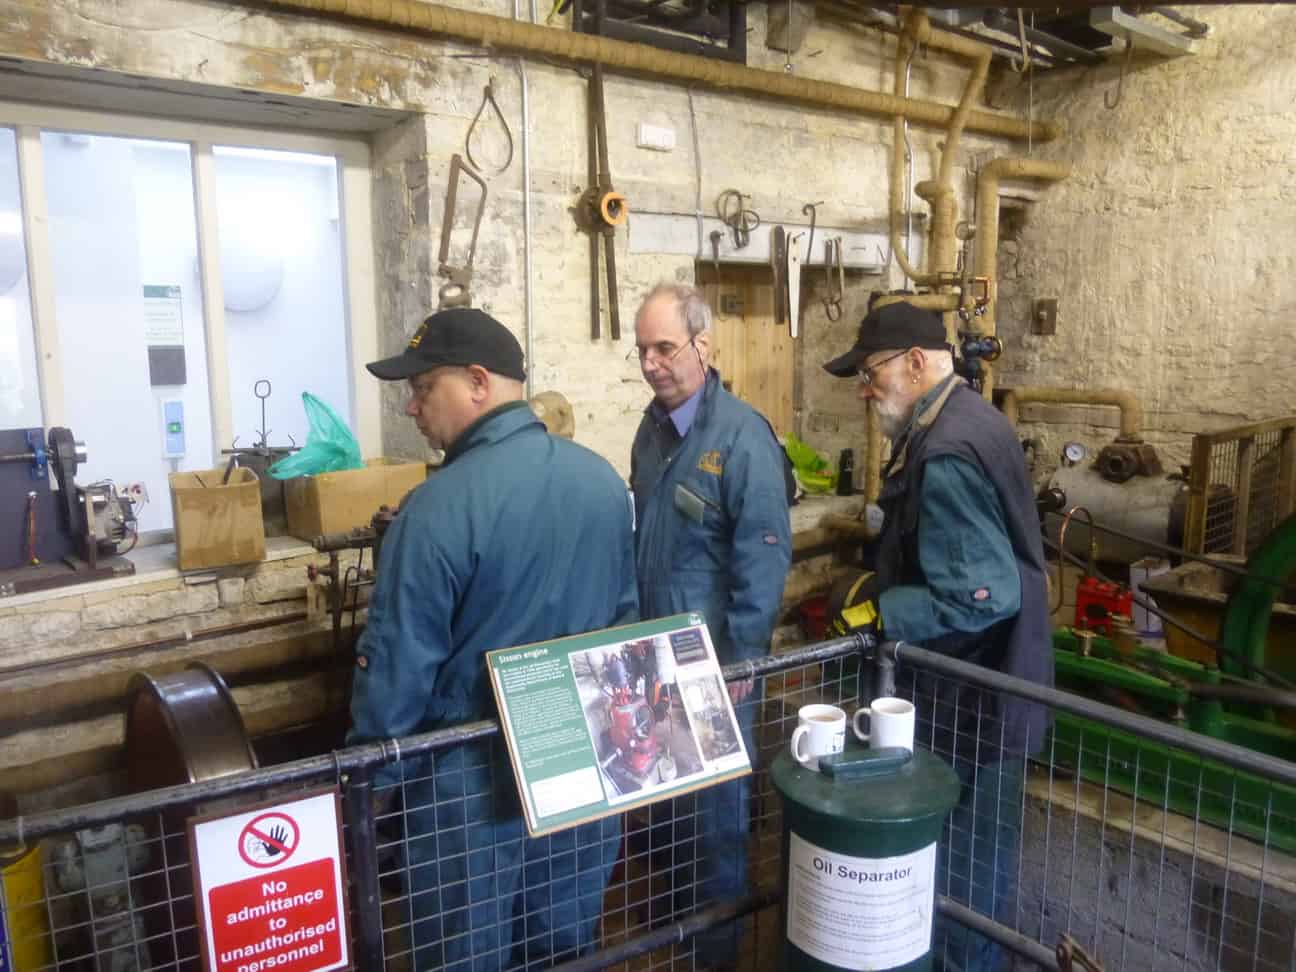 Alan, Ian and Brian - Small Steam Engines